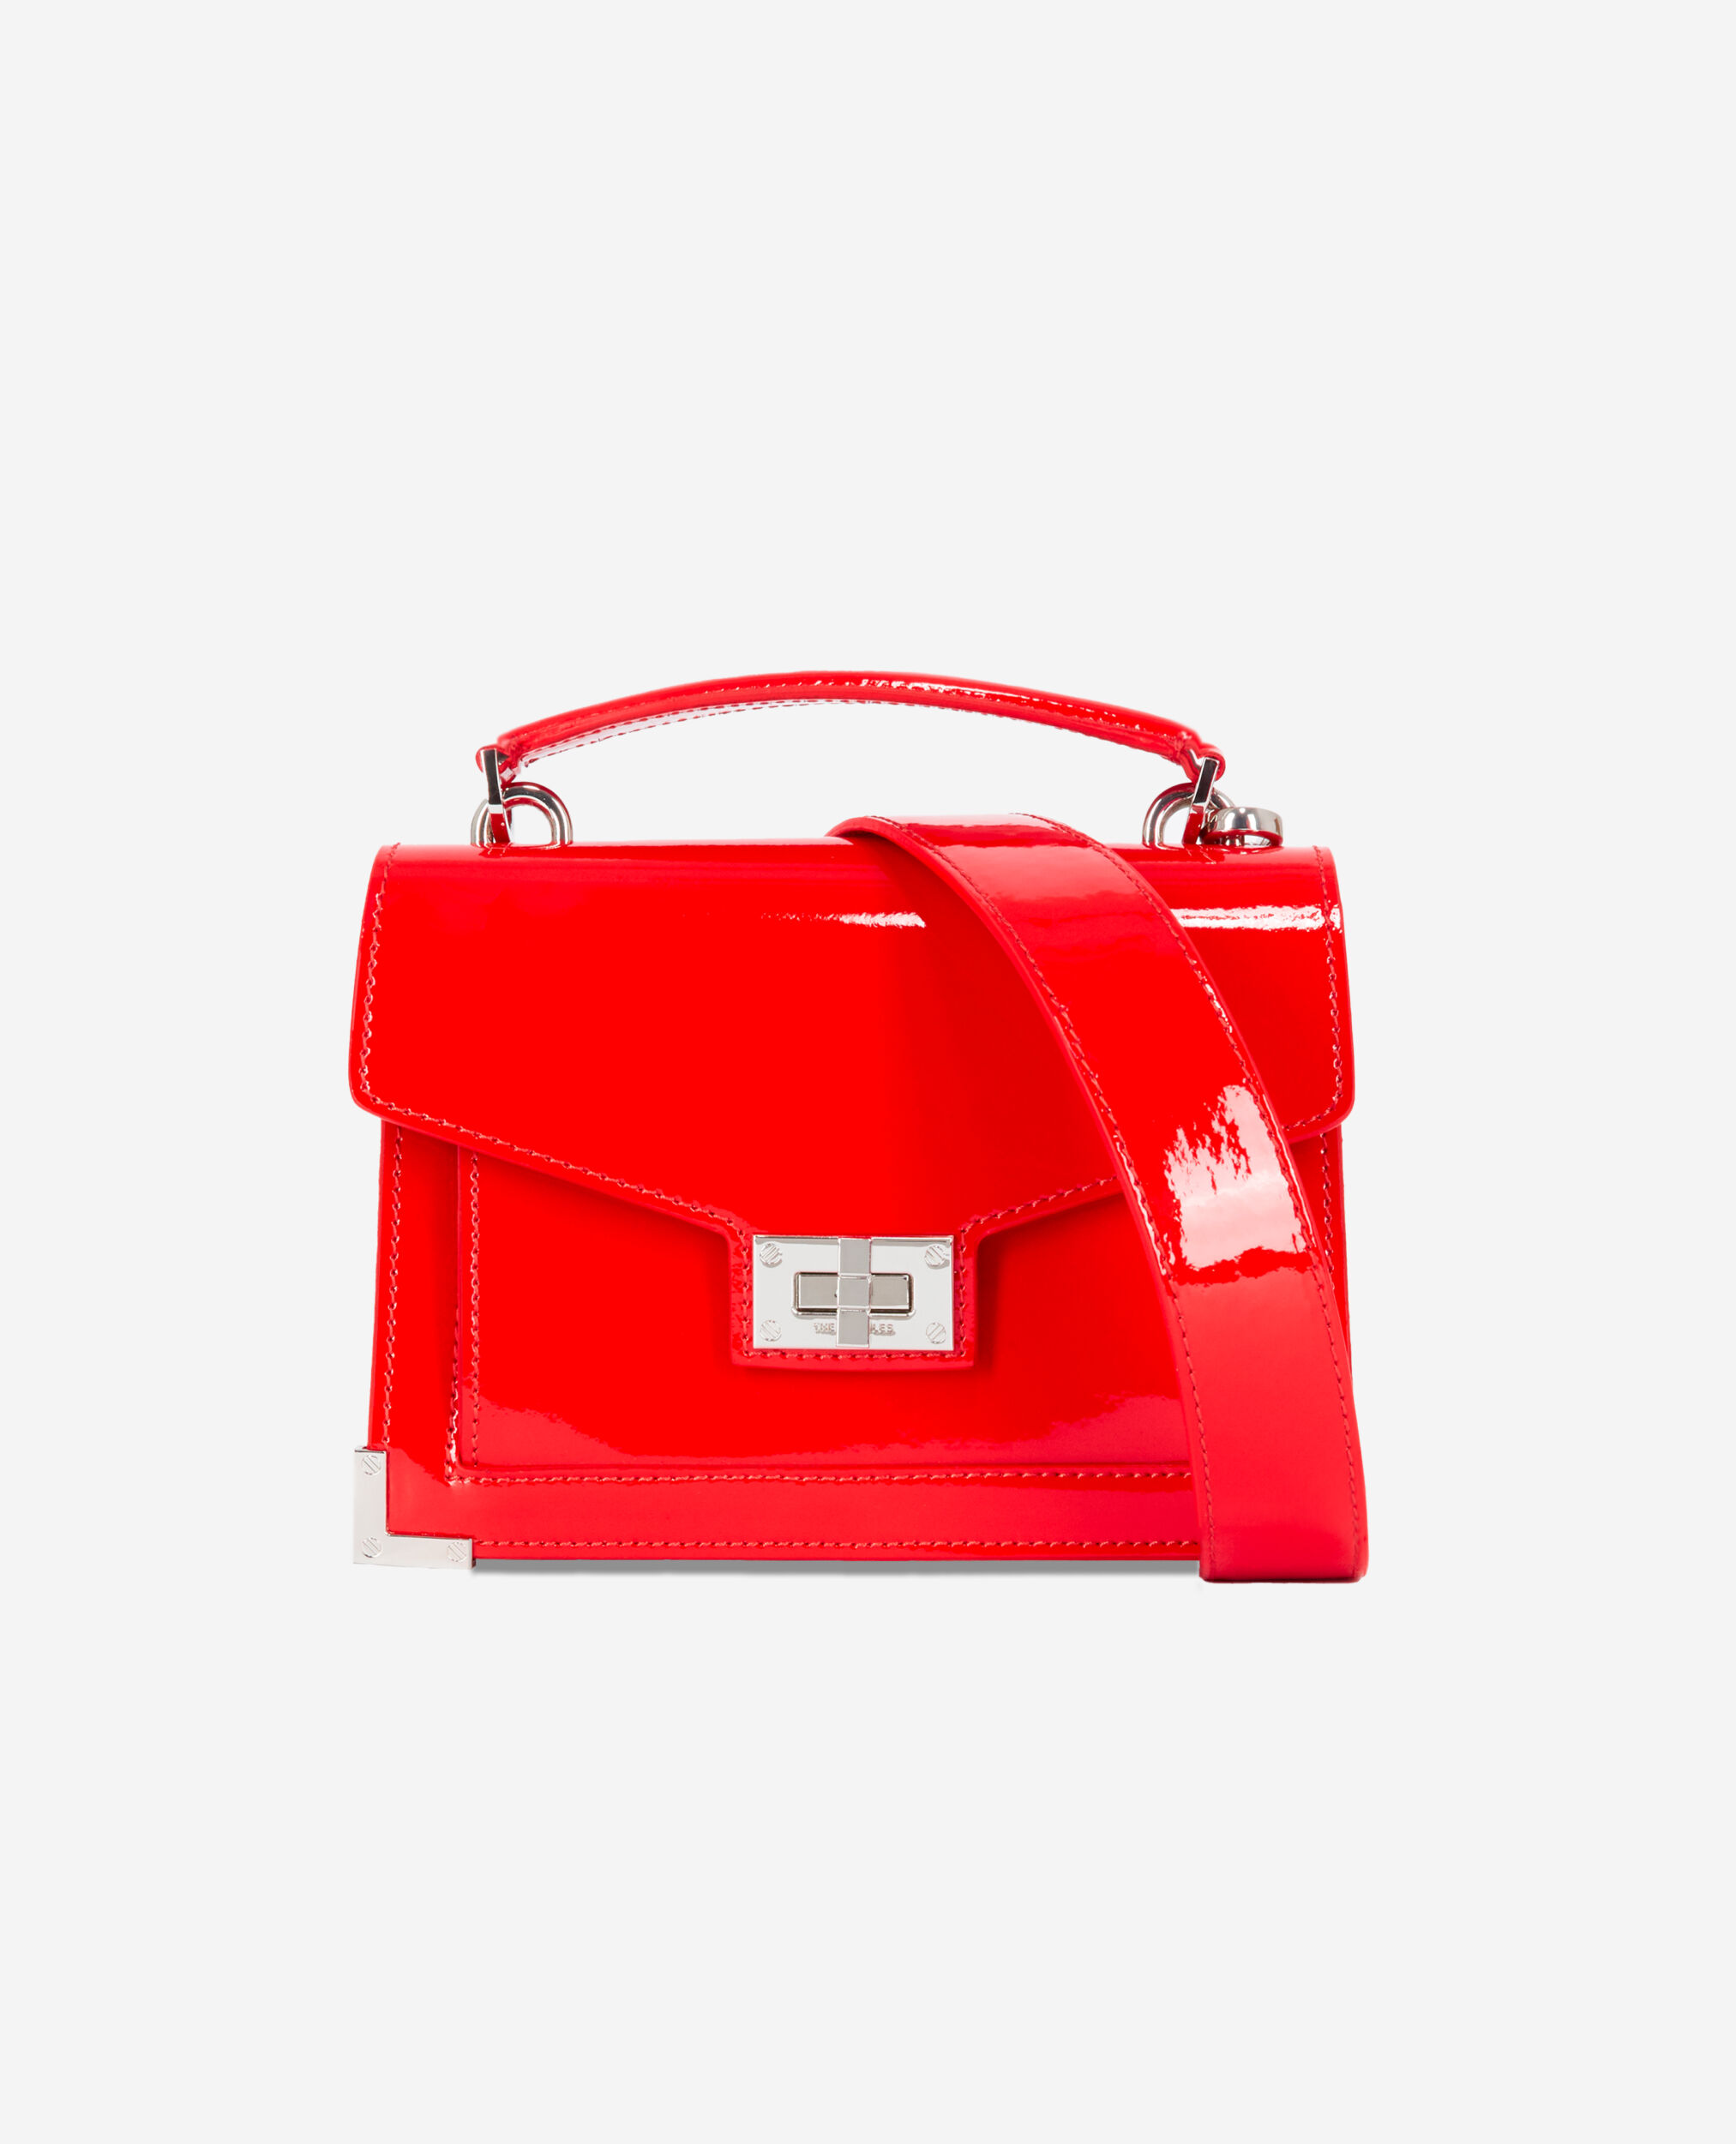 Small Emily bag in red leather, RED, hi-res image number null